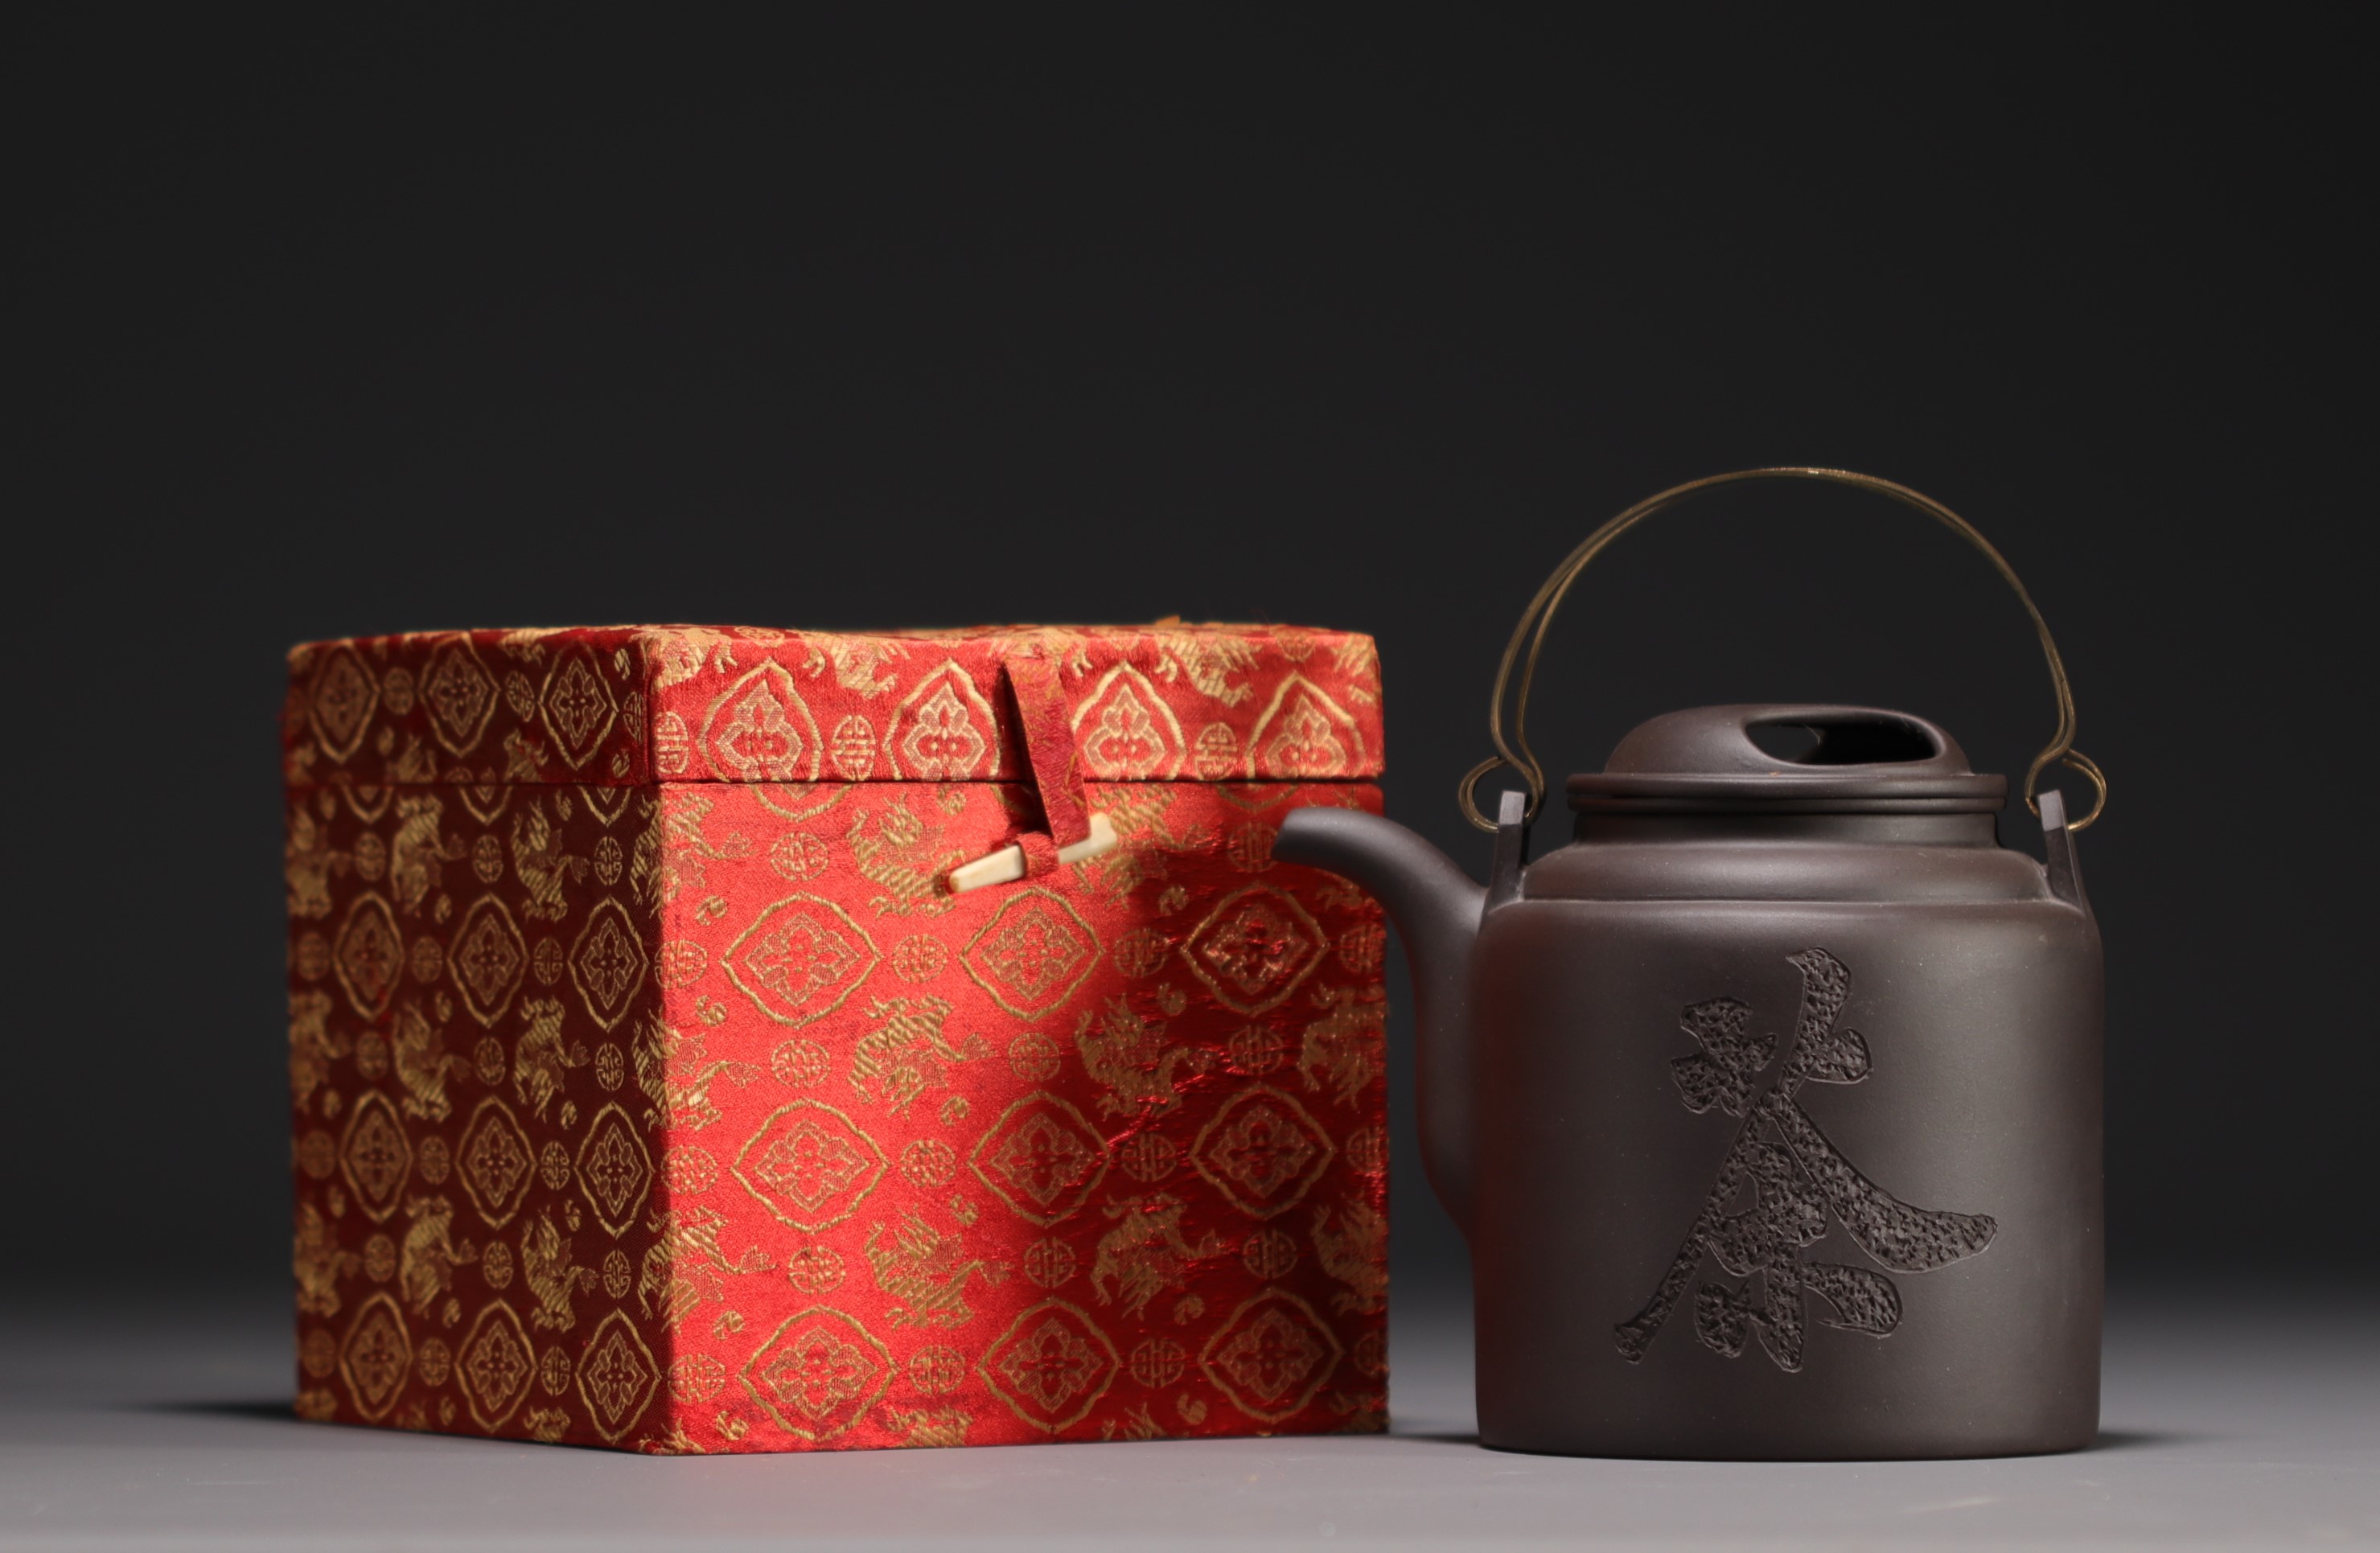 China - Yixing violet clay teapot in its box, 20th century.